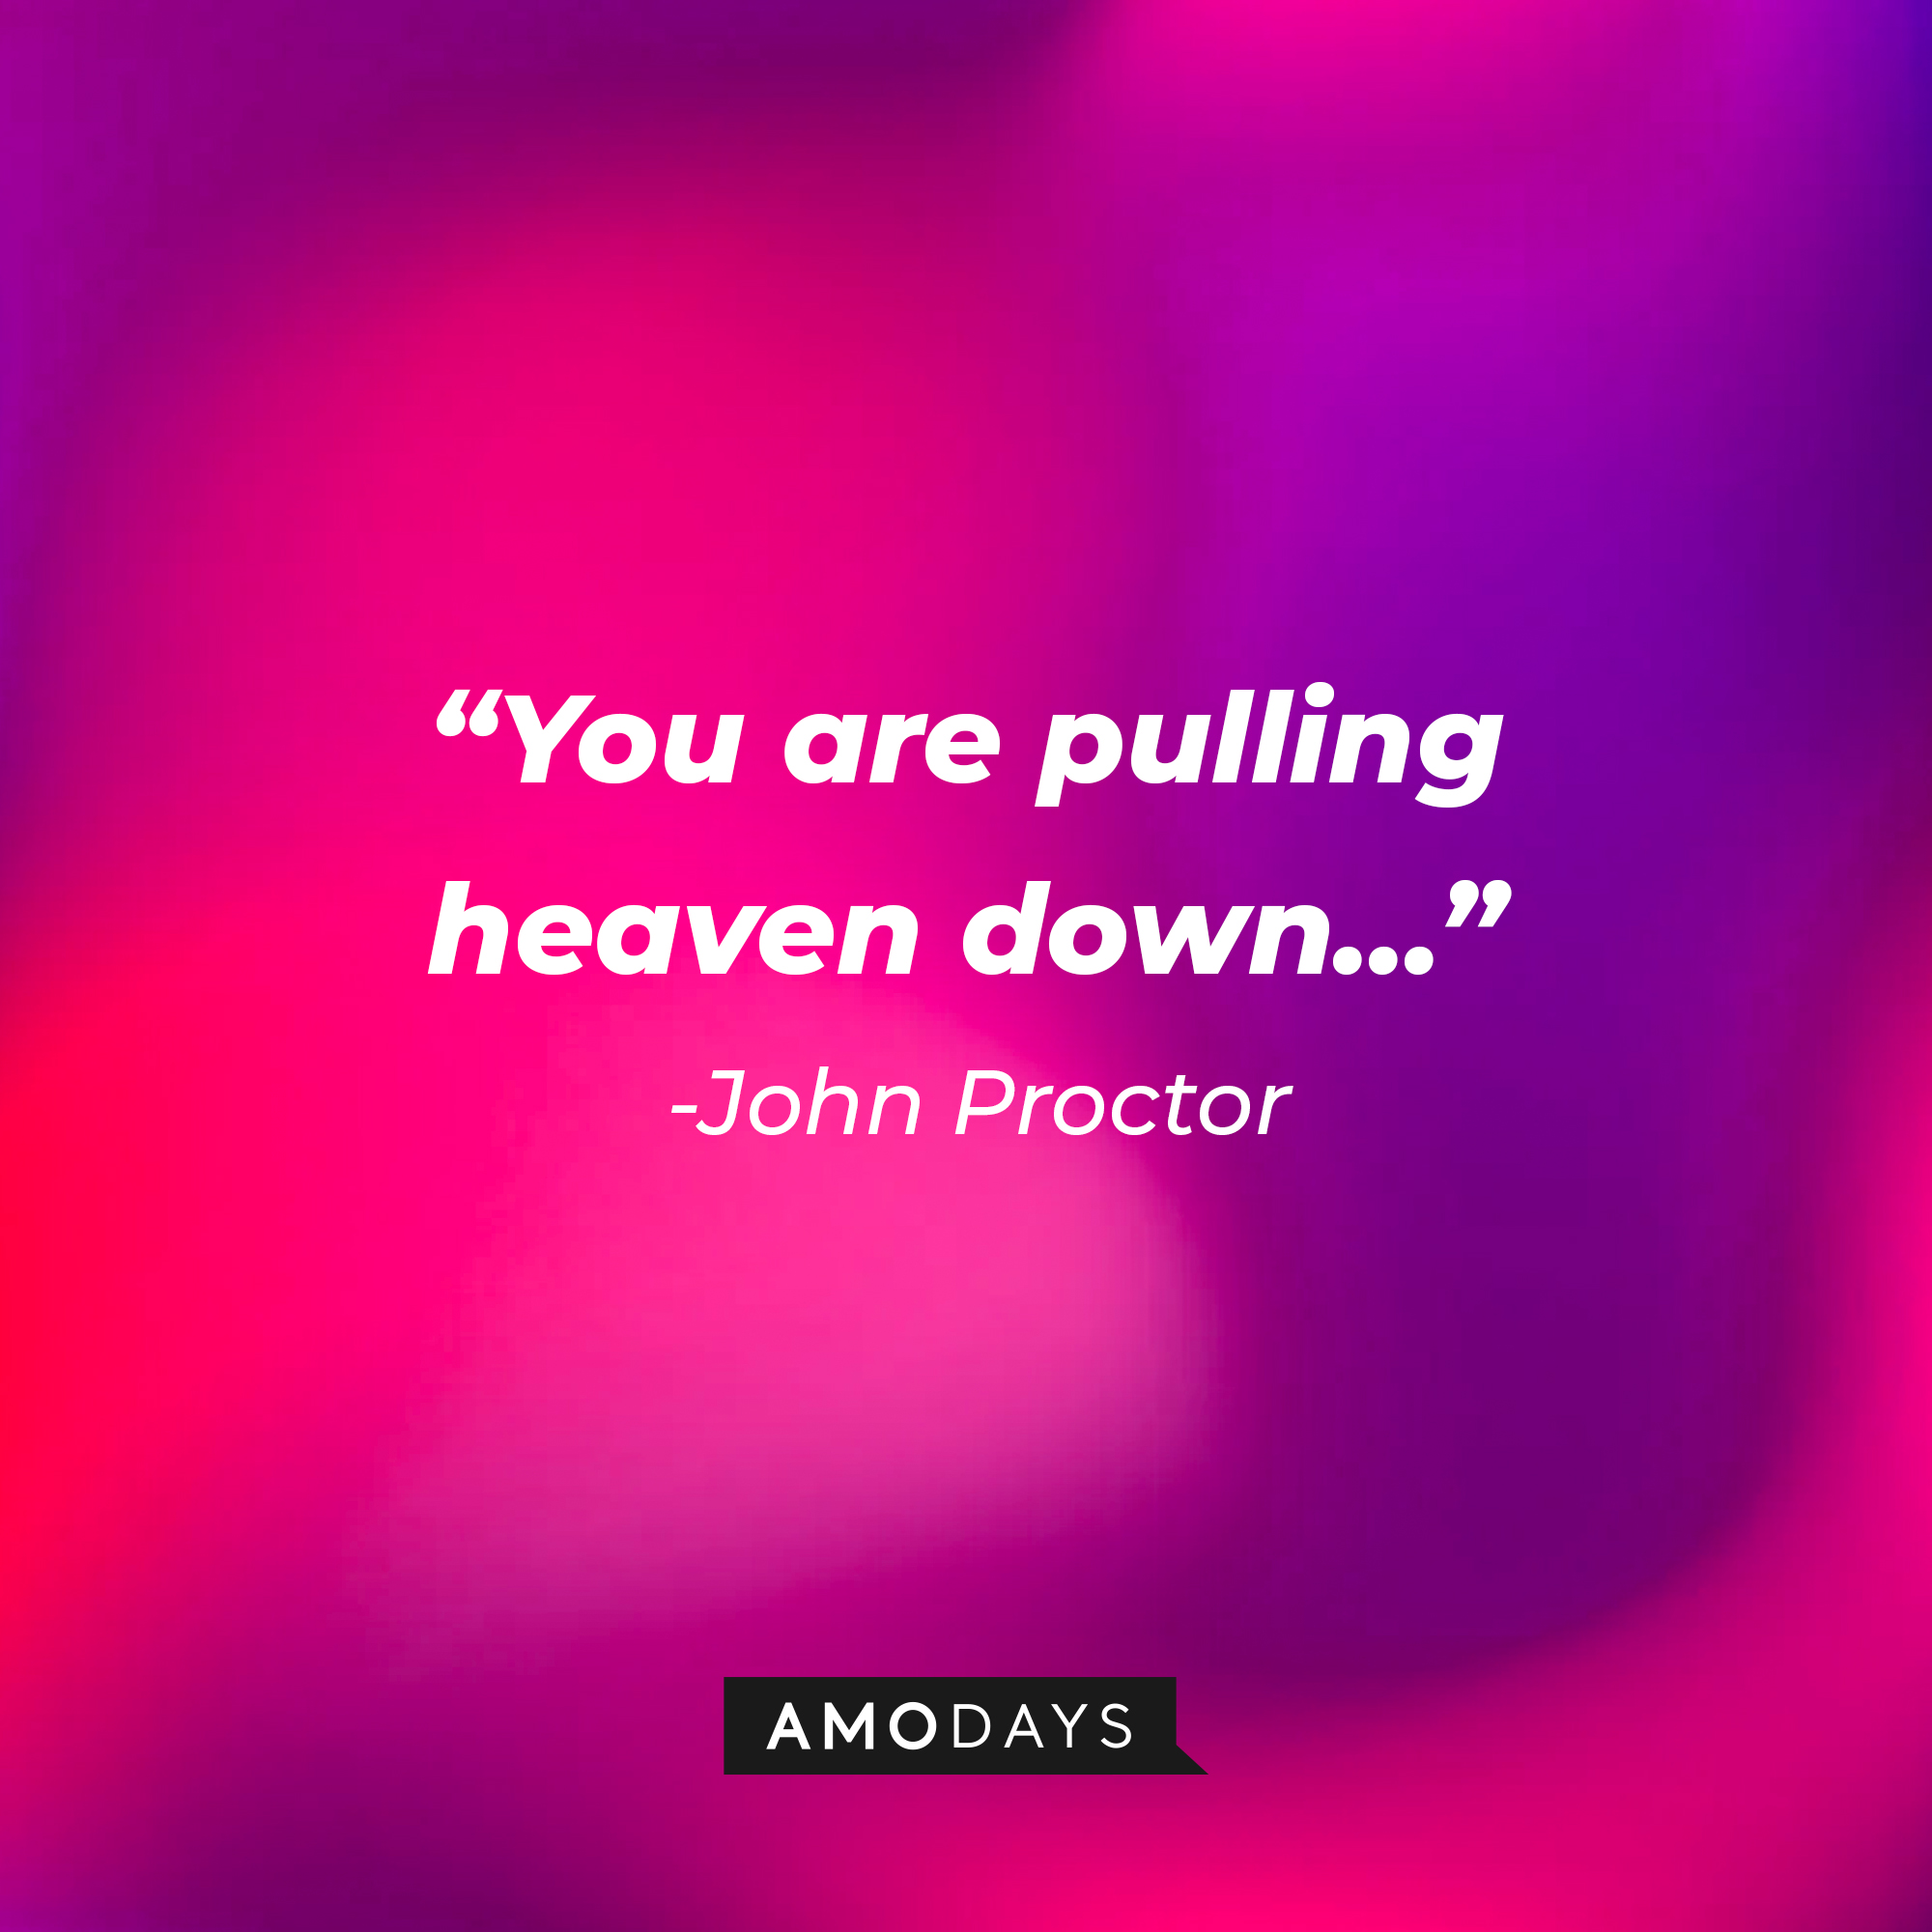 John Proctor's quote: "You are pulling heaven down..." | Image: AmoDays